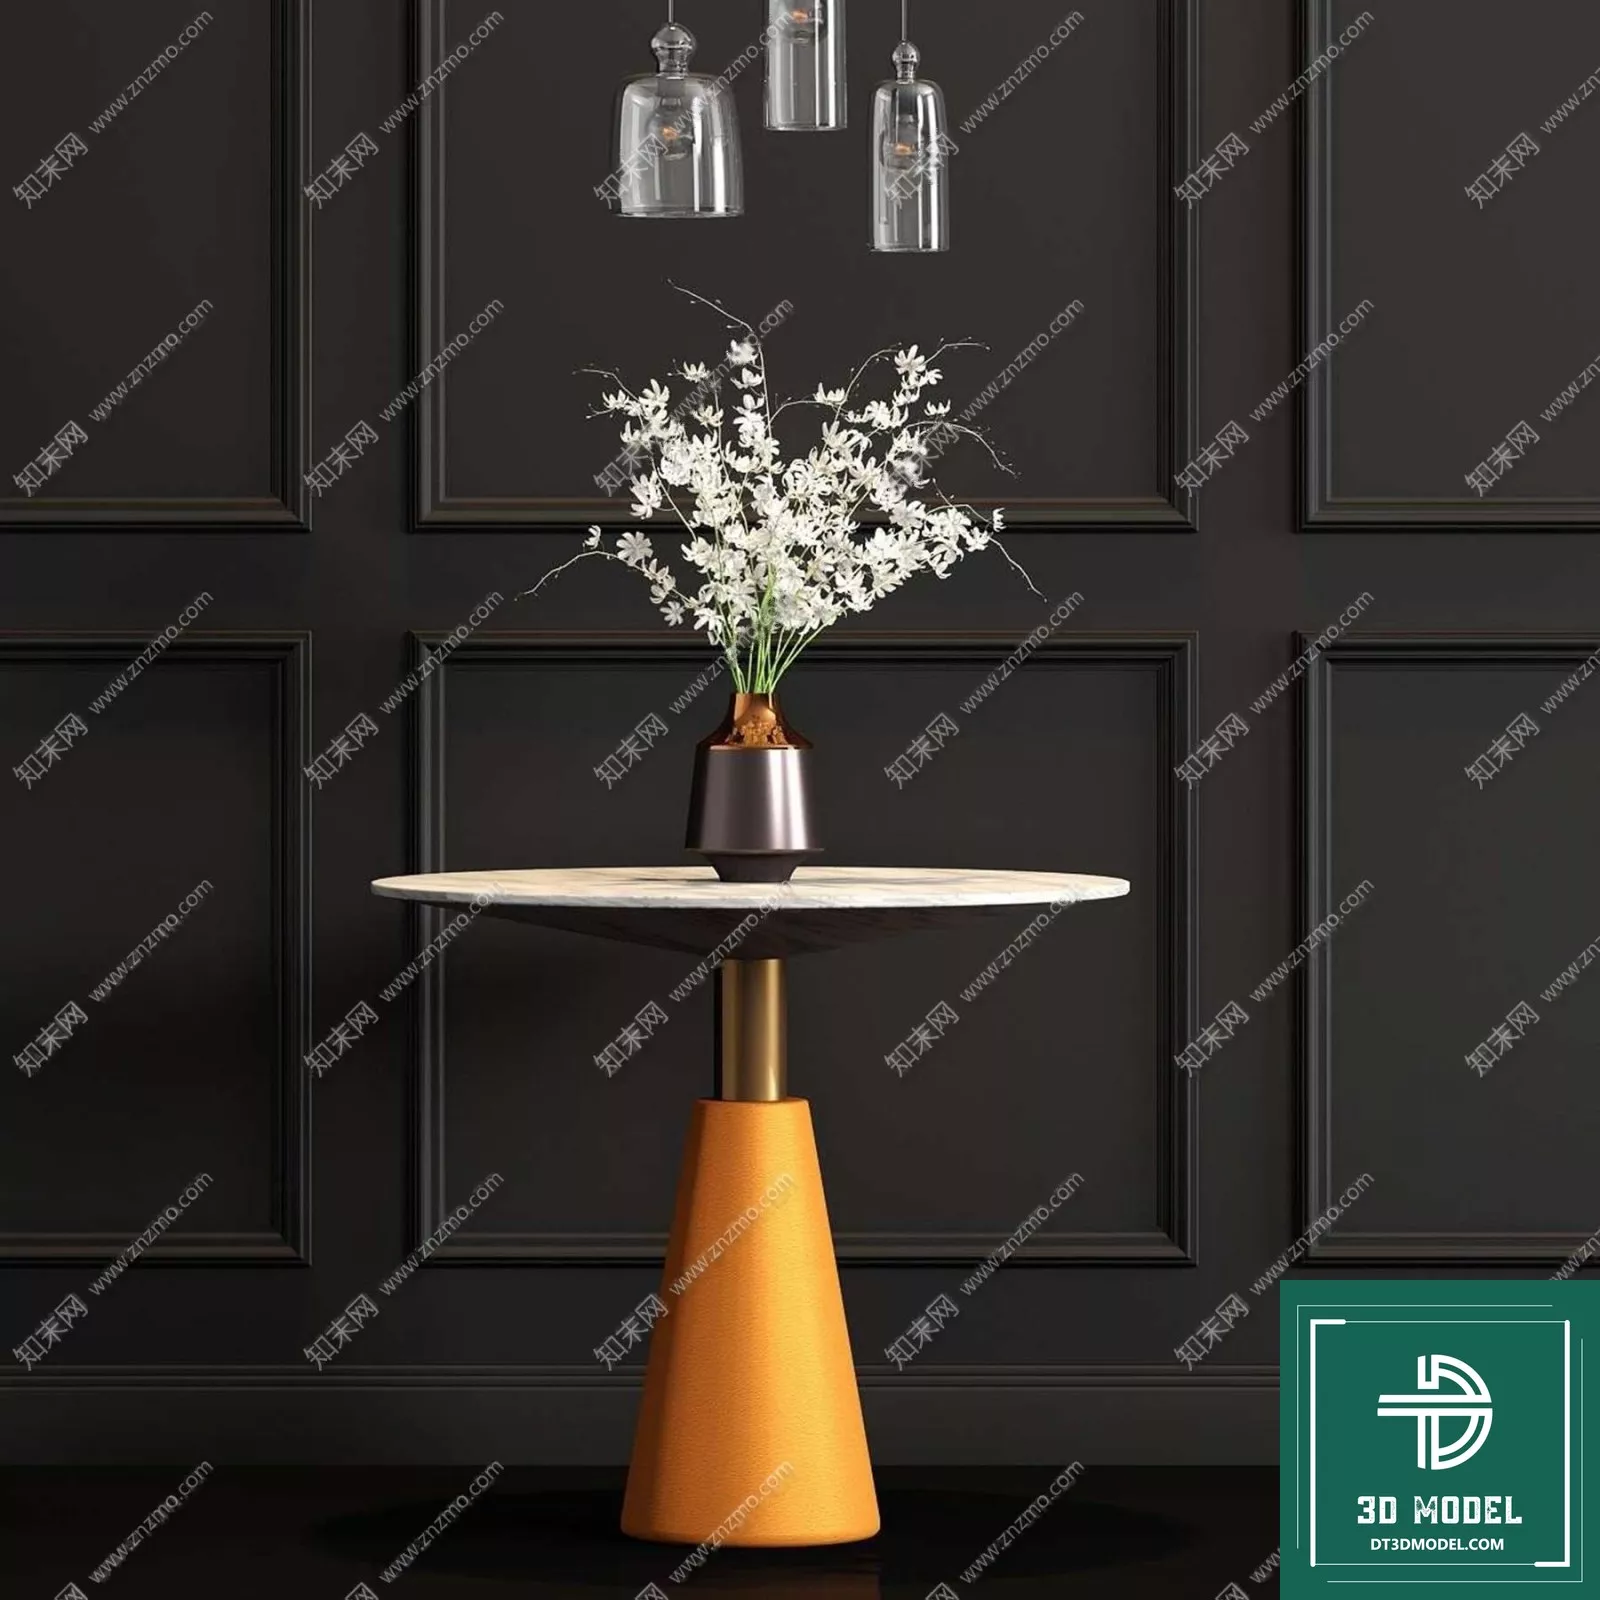 MODERN TEA TABLE - SKETCHUP 3D MODEL - VRAY OR ENSCAPE - ID14919